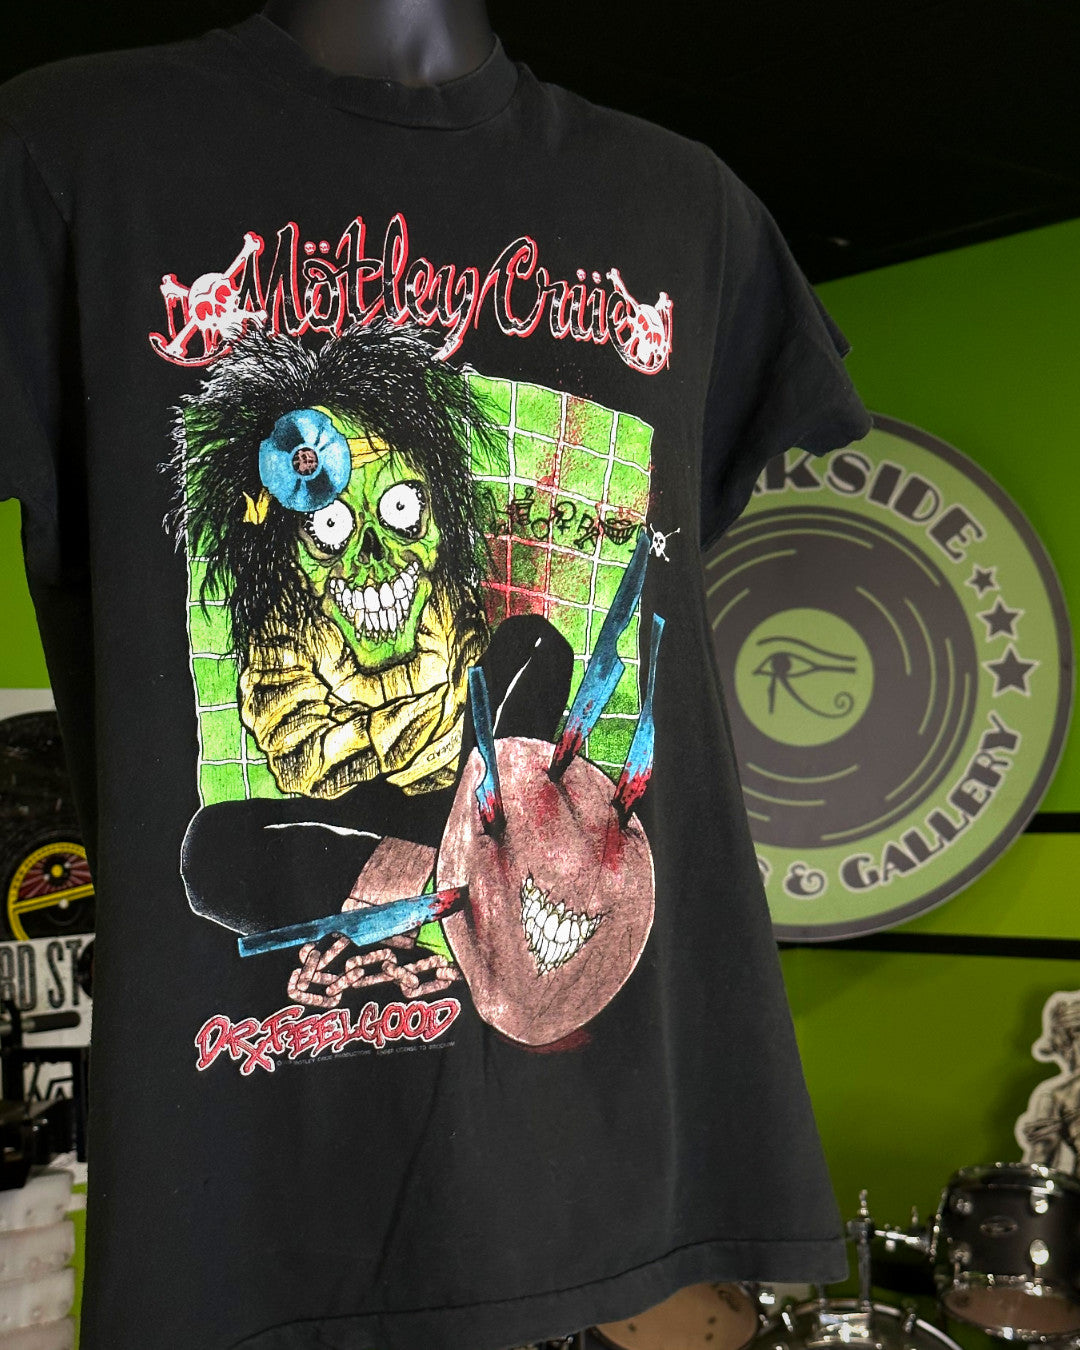 Motley Crue 1989 Dr Feelgood Pushead T-Shirt, Blk, L (Tagged XL)(Measures 30” Long, 20.5” Pit To Pit) - Darkside Records